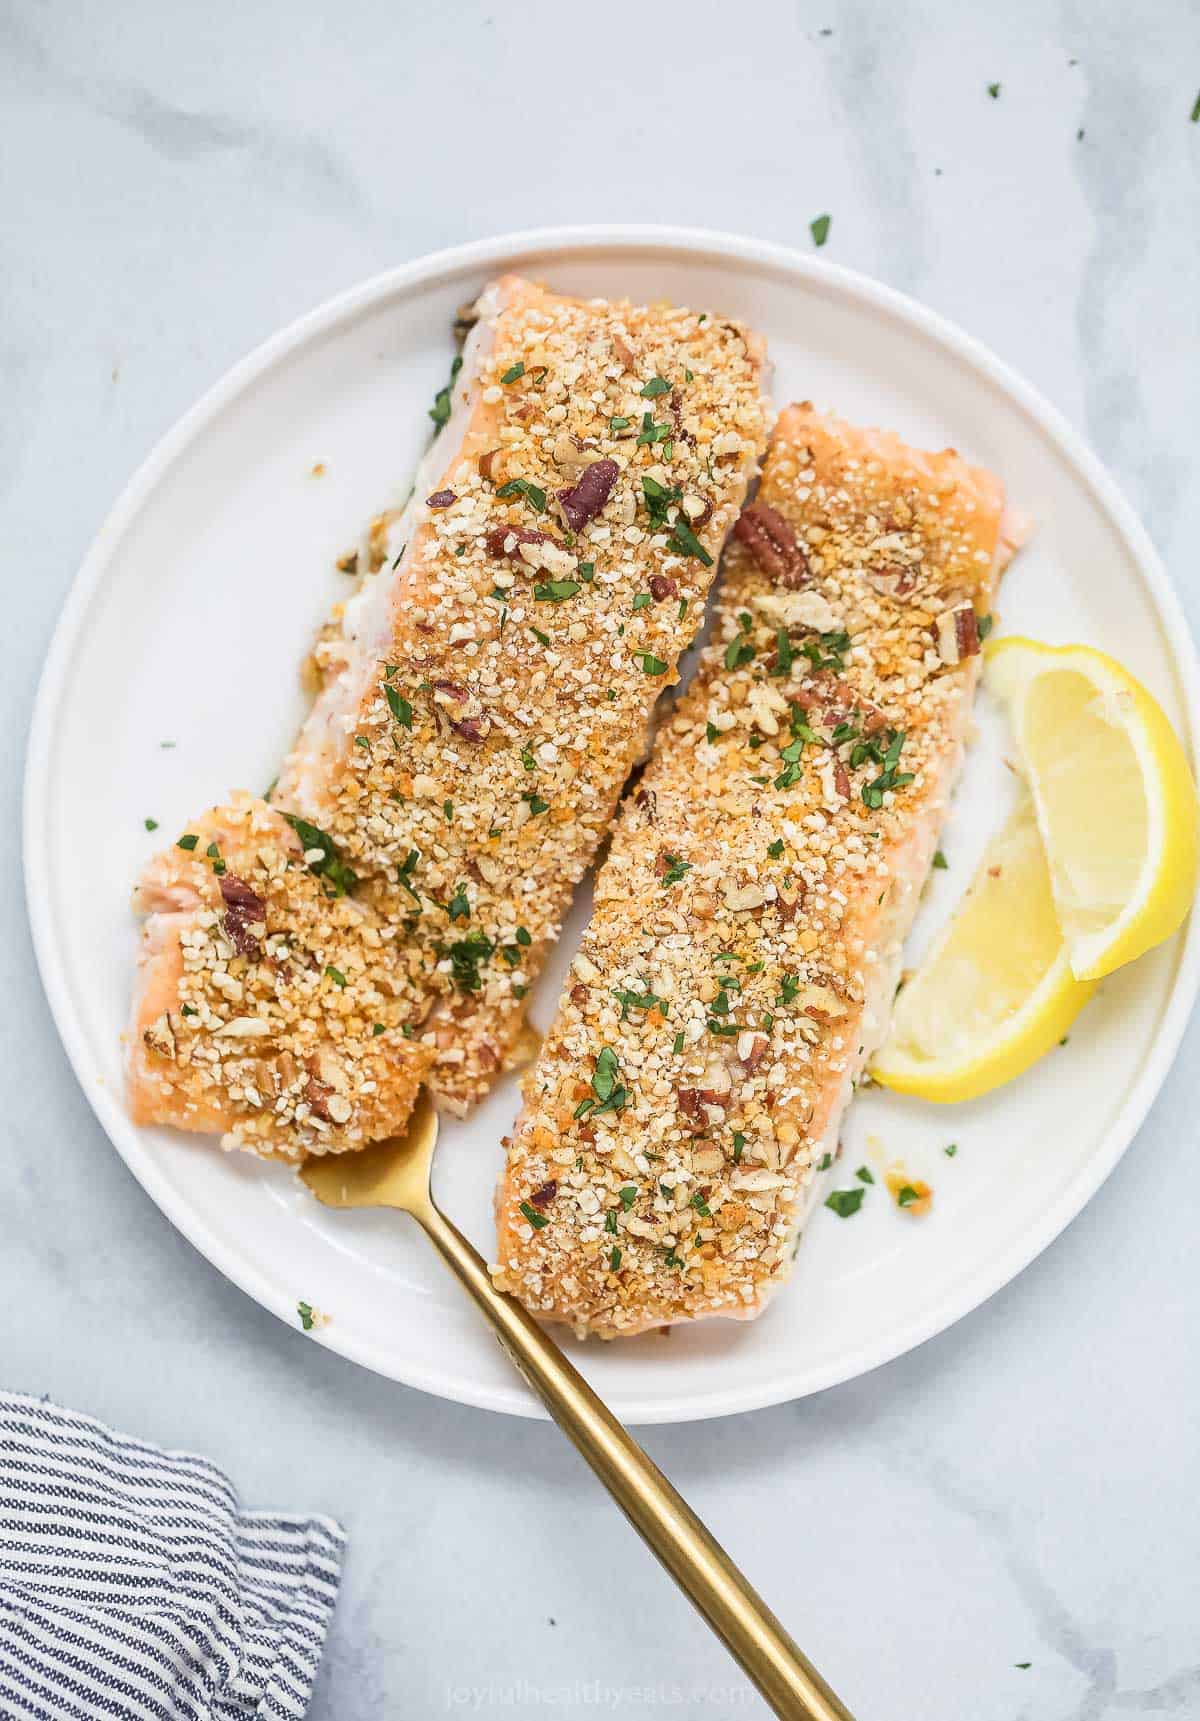 Two pecan crusted salmon filets on a plate.